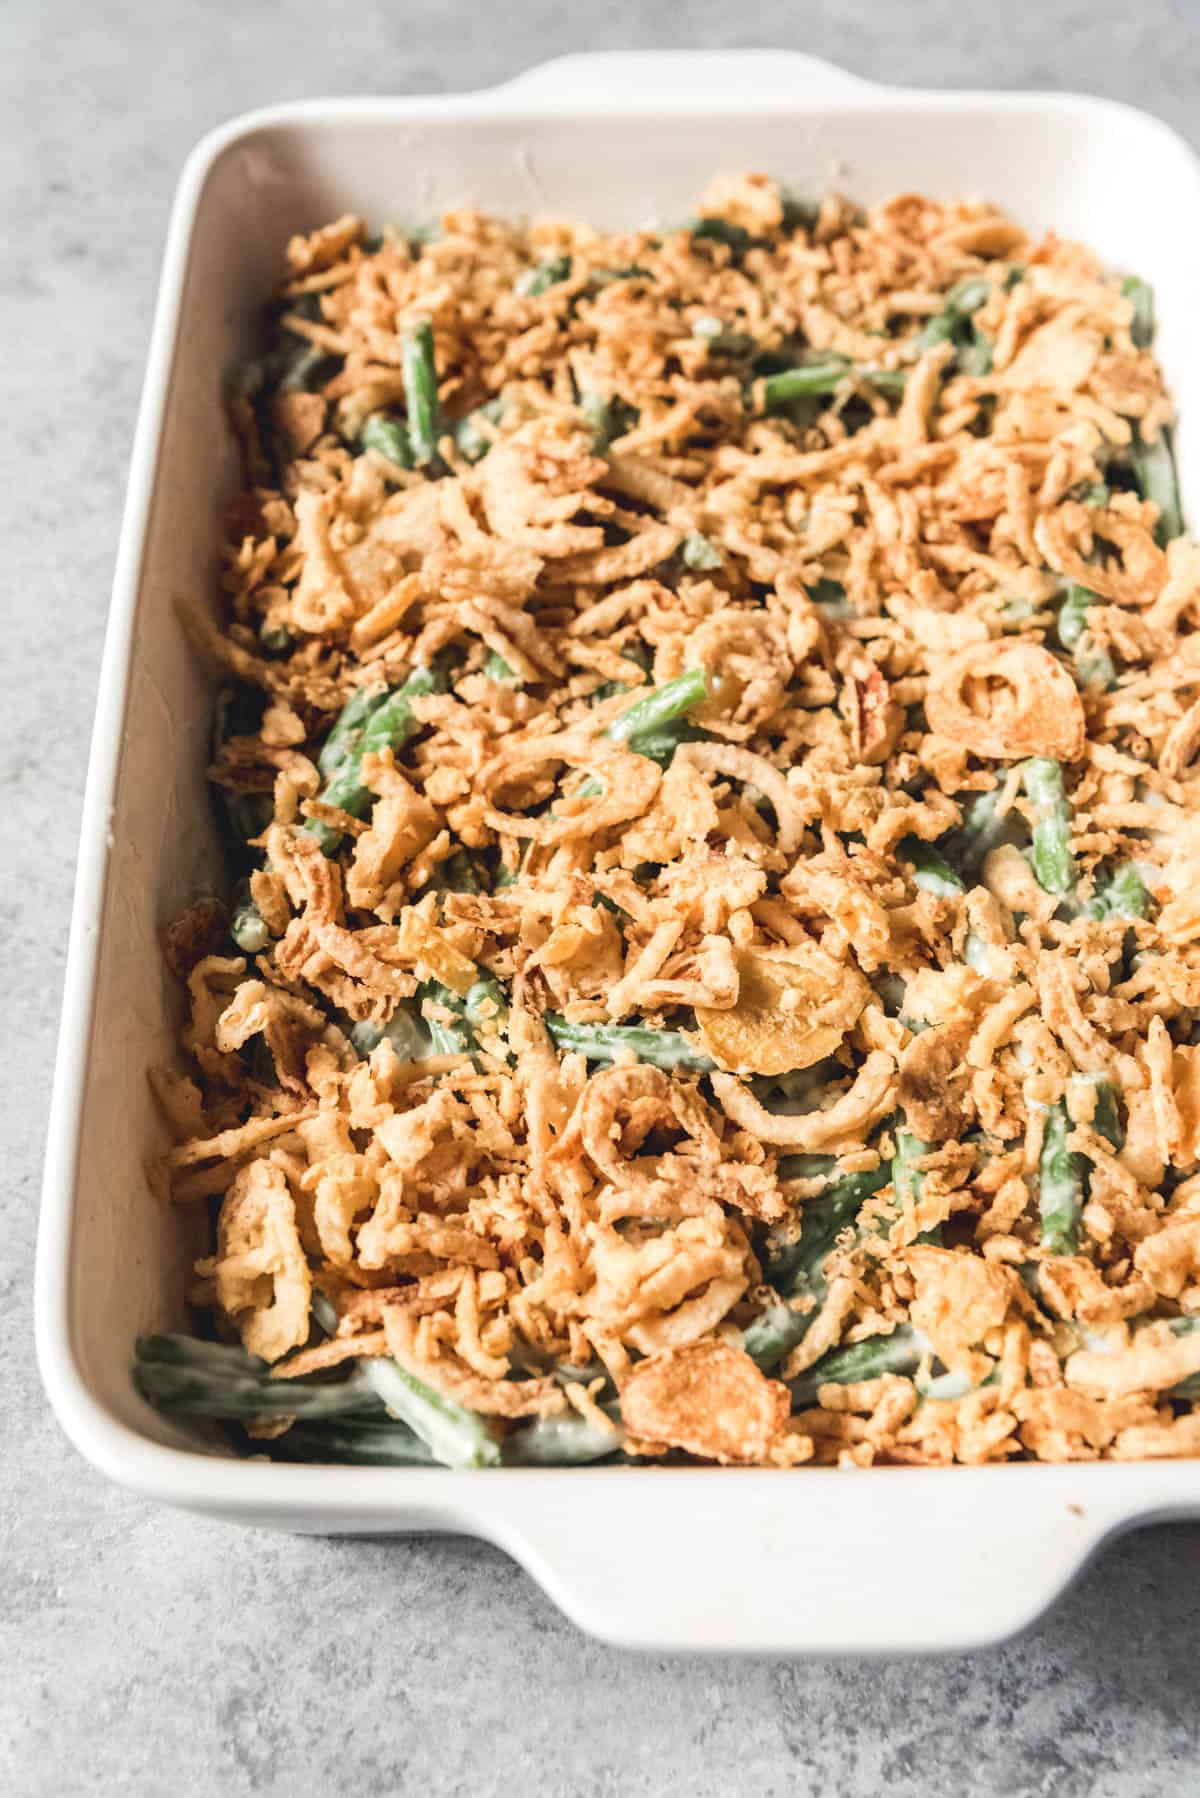 An image of a classic green bean casserole topped with fried onions before going into the oven to bake.